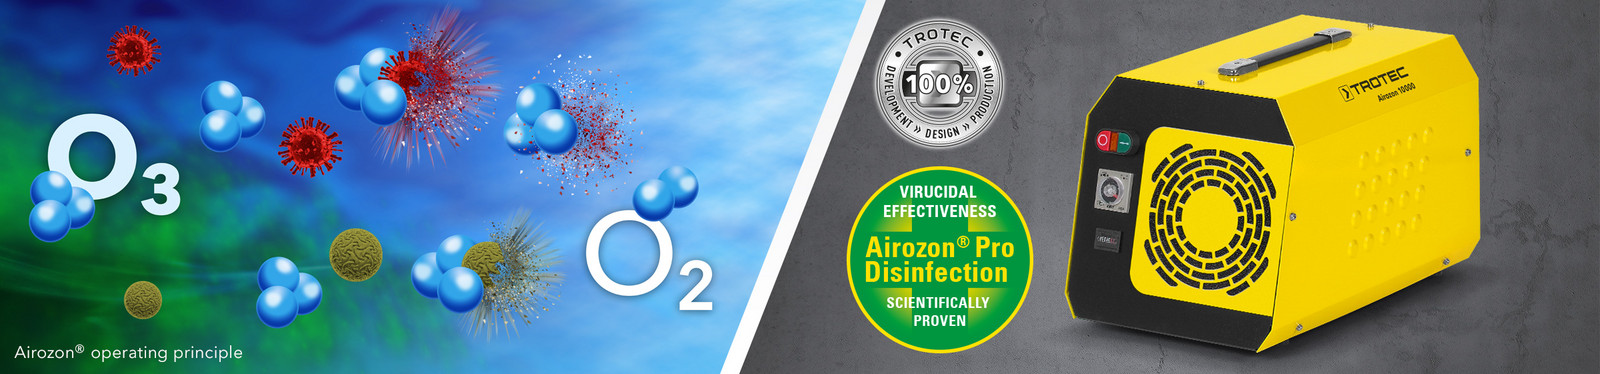 Ozone generator Airozon 10000 from Trotec for local odour neutralization and disinfection by oxidation